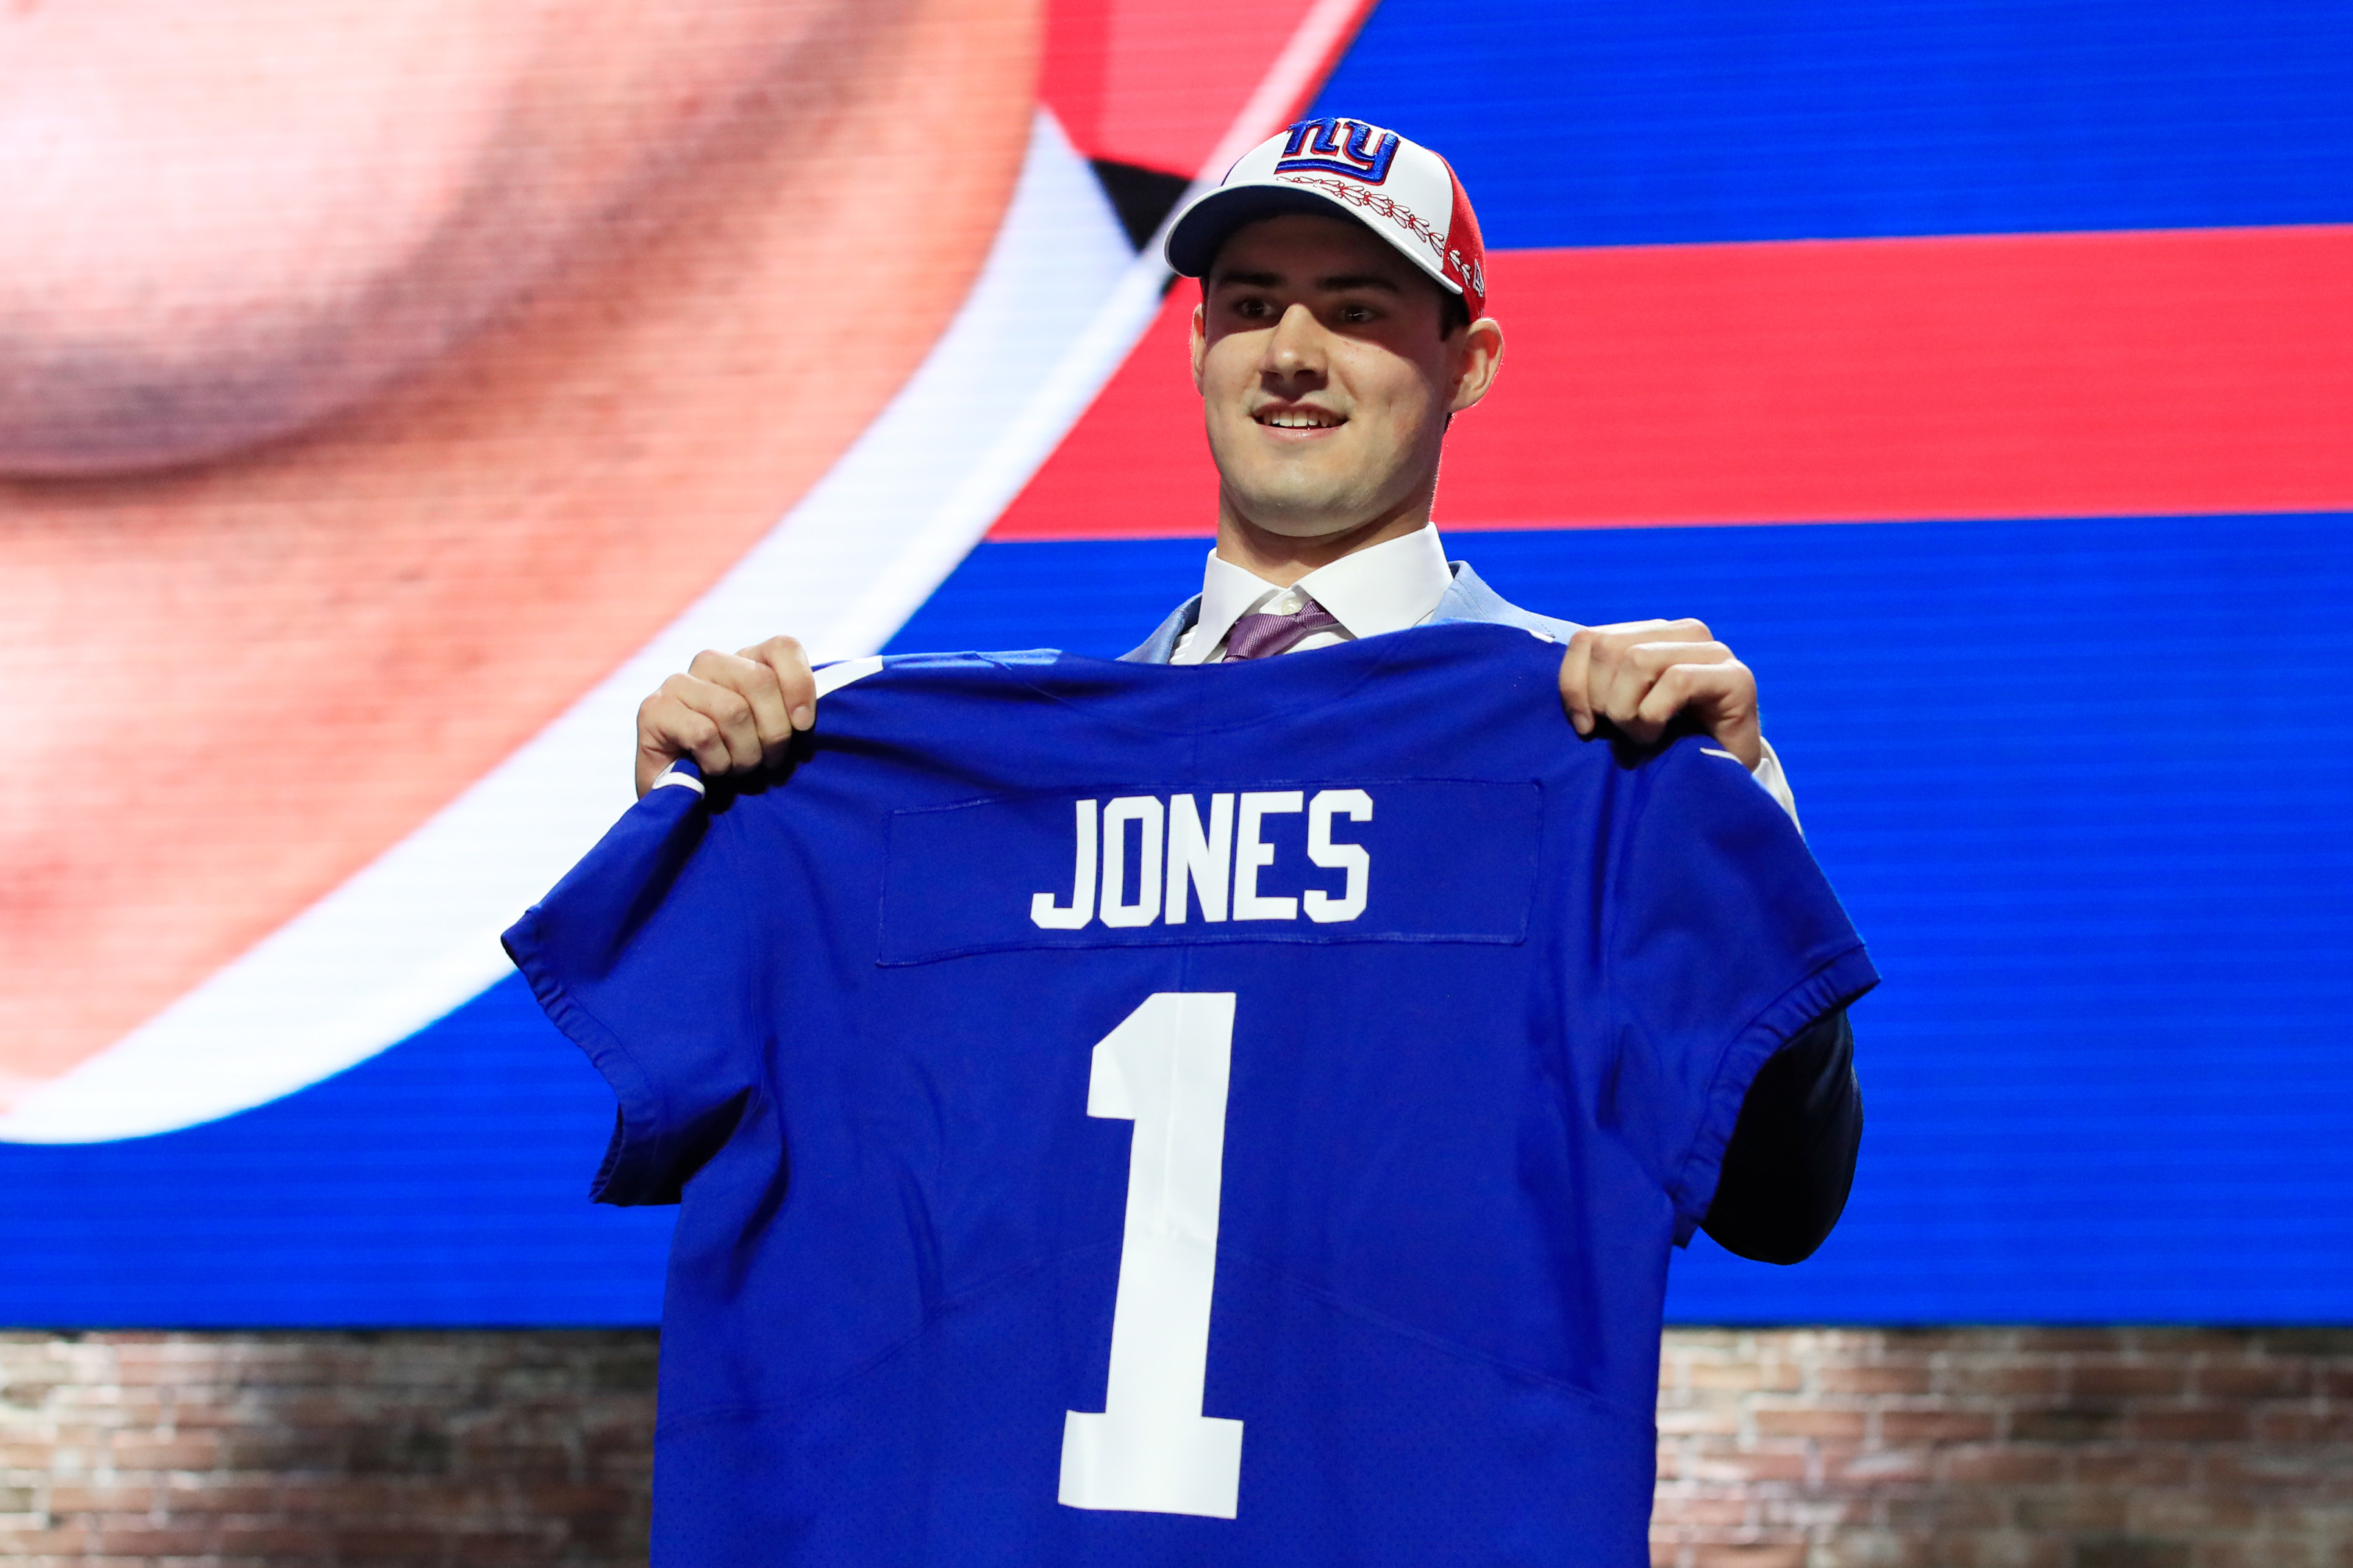 Daniel Jones signs his rookie contract with the New York Giants